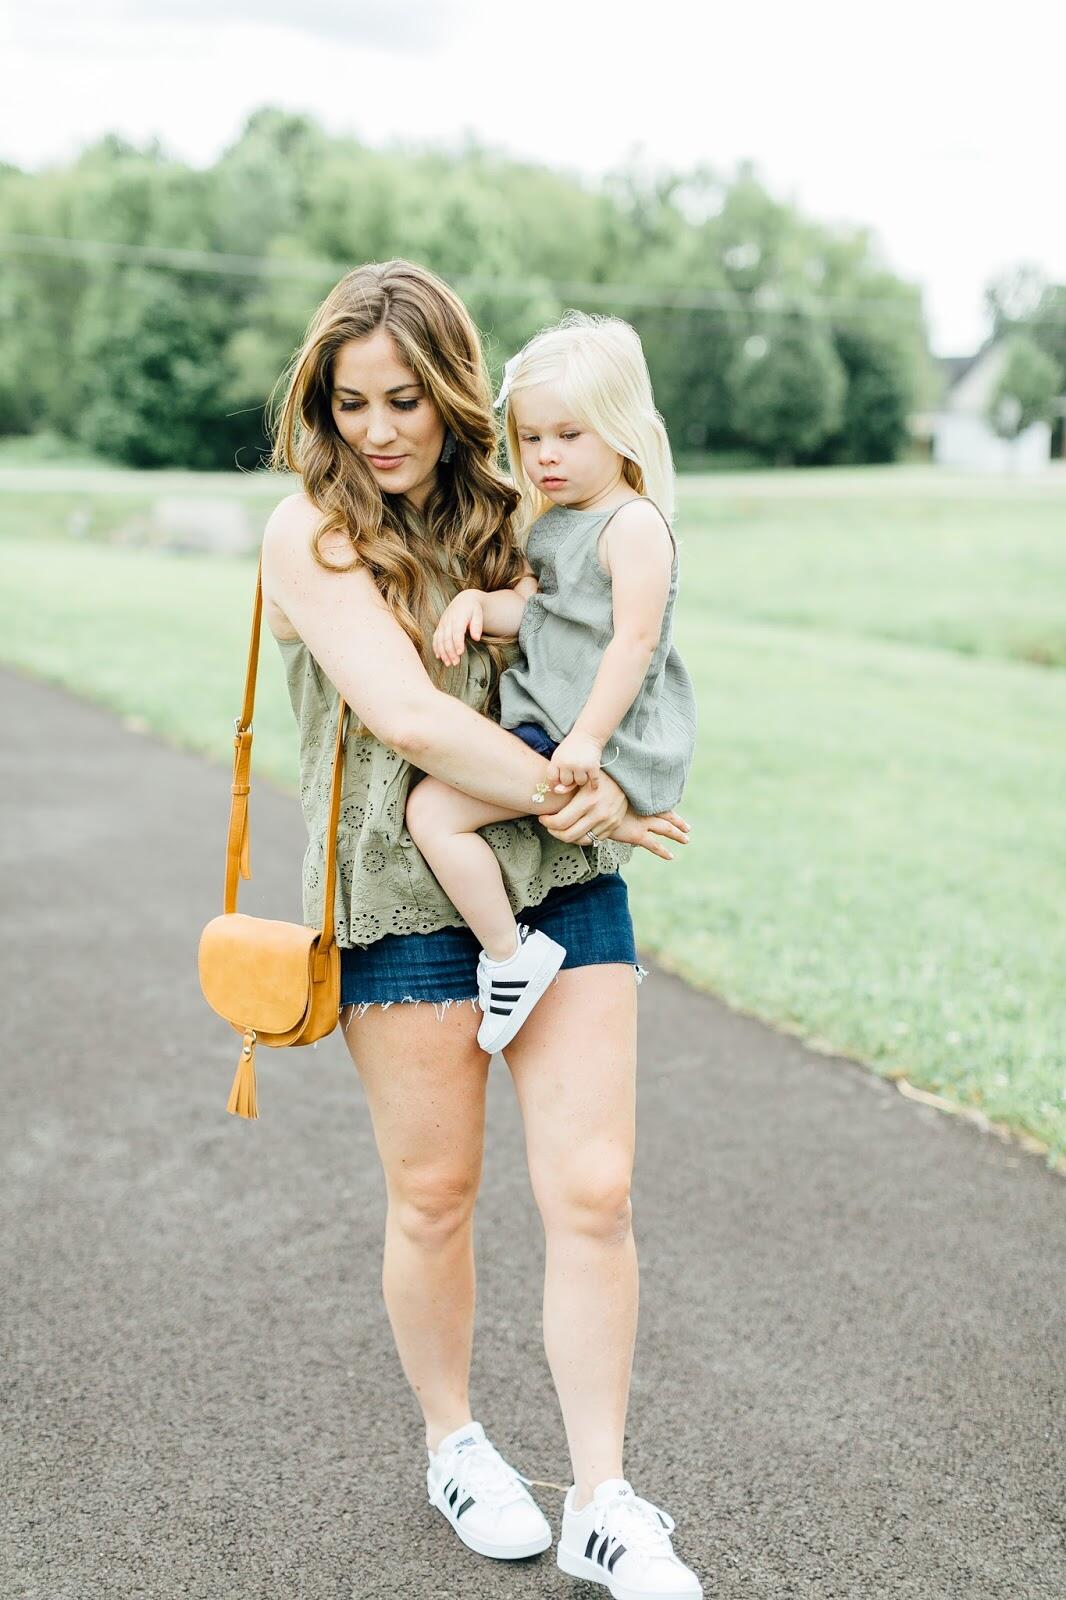 Where to Buy Affordable Casual Summer Clothing for Kids & Moms - Walking in  Memphis in High Heels